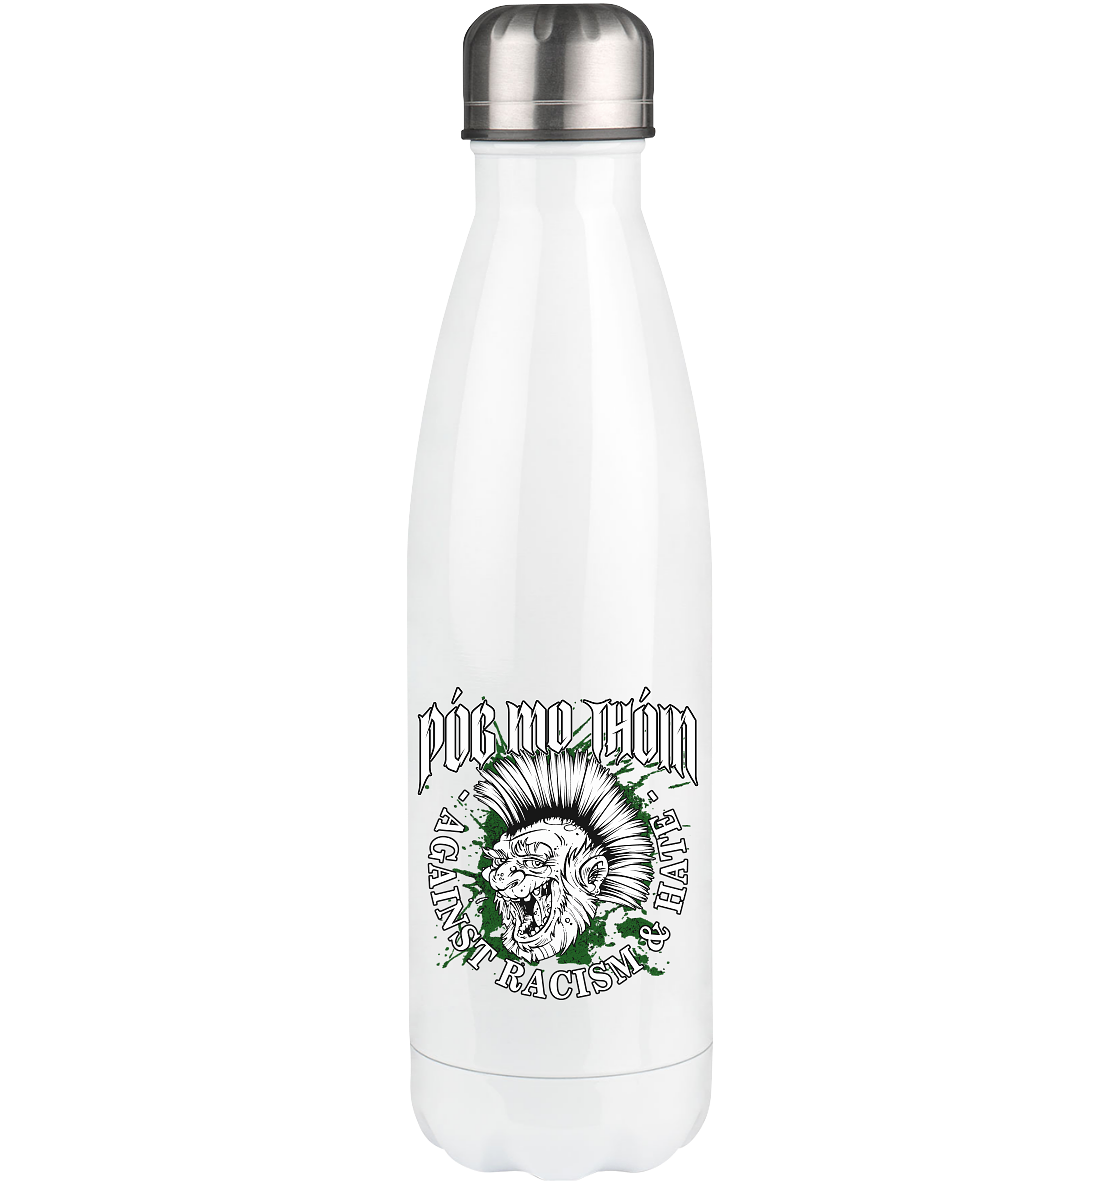 Póg Mo Thóin Streetwear "Against Racism & Hate" - Thermoflasche 500ml